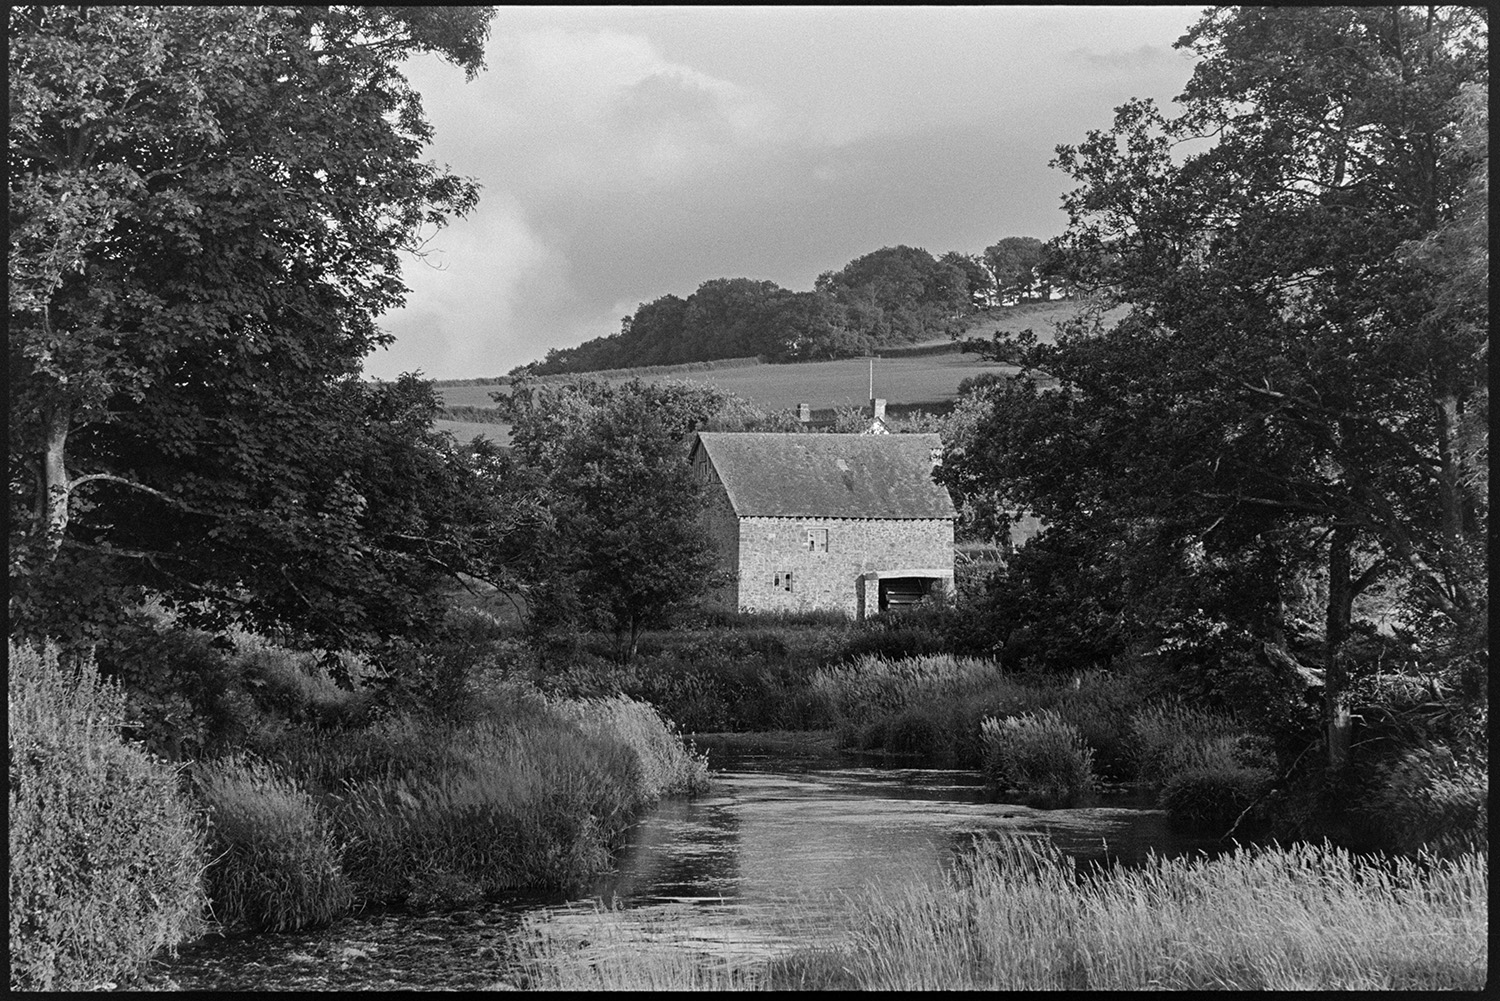 River with old stone mill. <br />
[The River Taw running past the stone mill buildings of Rashleigh Mill near Bridge Reeve. Fields and trees can be seen in the background and along the river.]